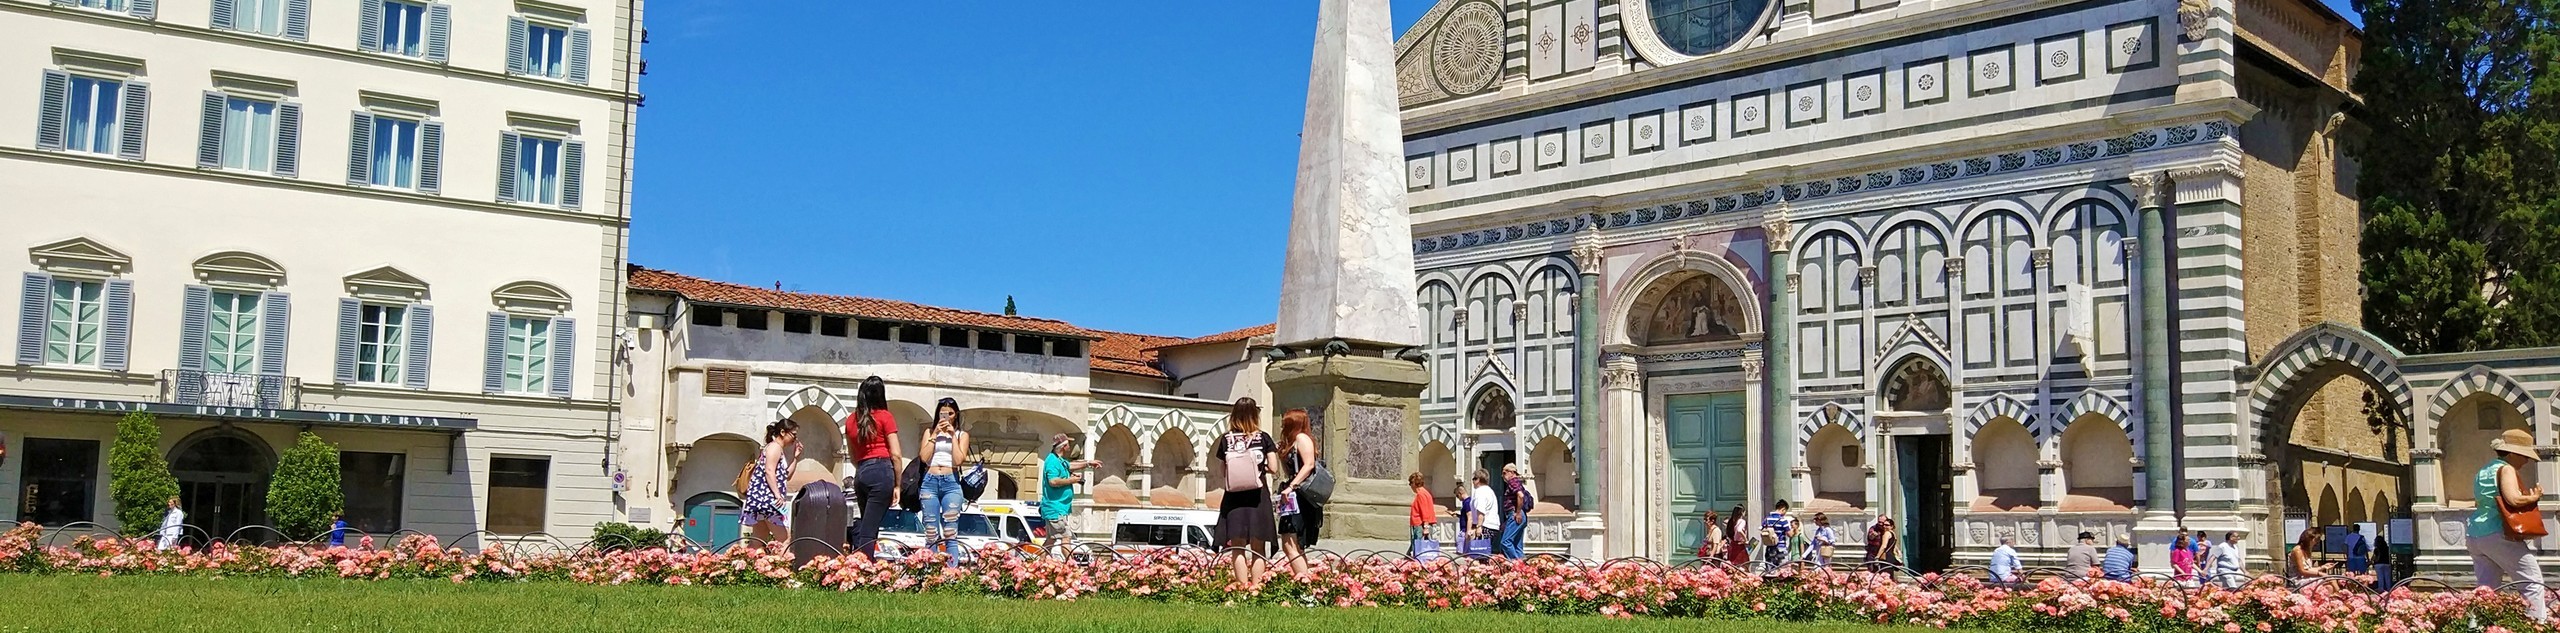 8-Day Venice to Florence Cycling Tour